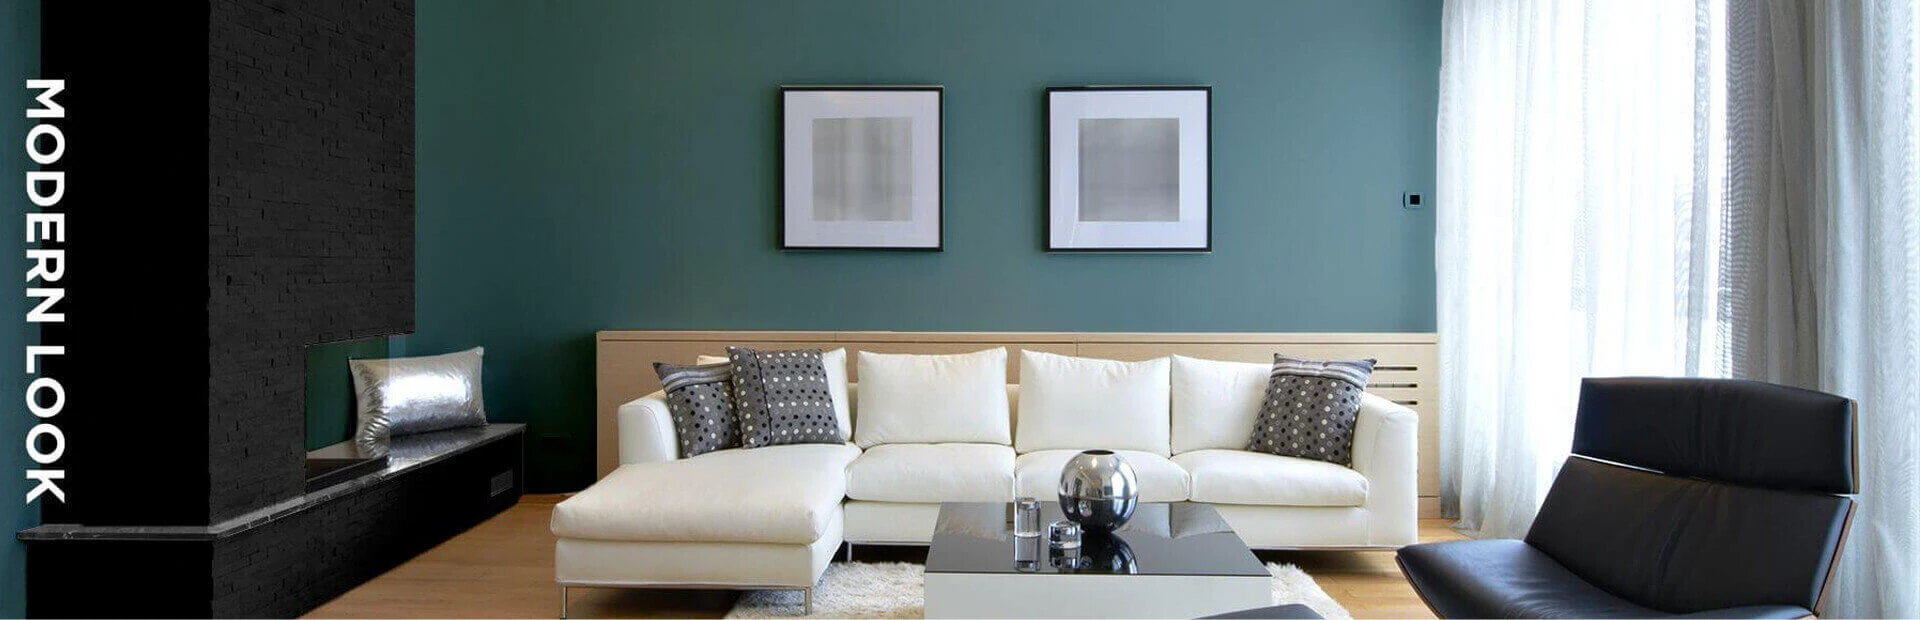 Living room with green, beige and black colour scheme.